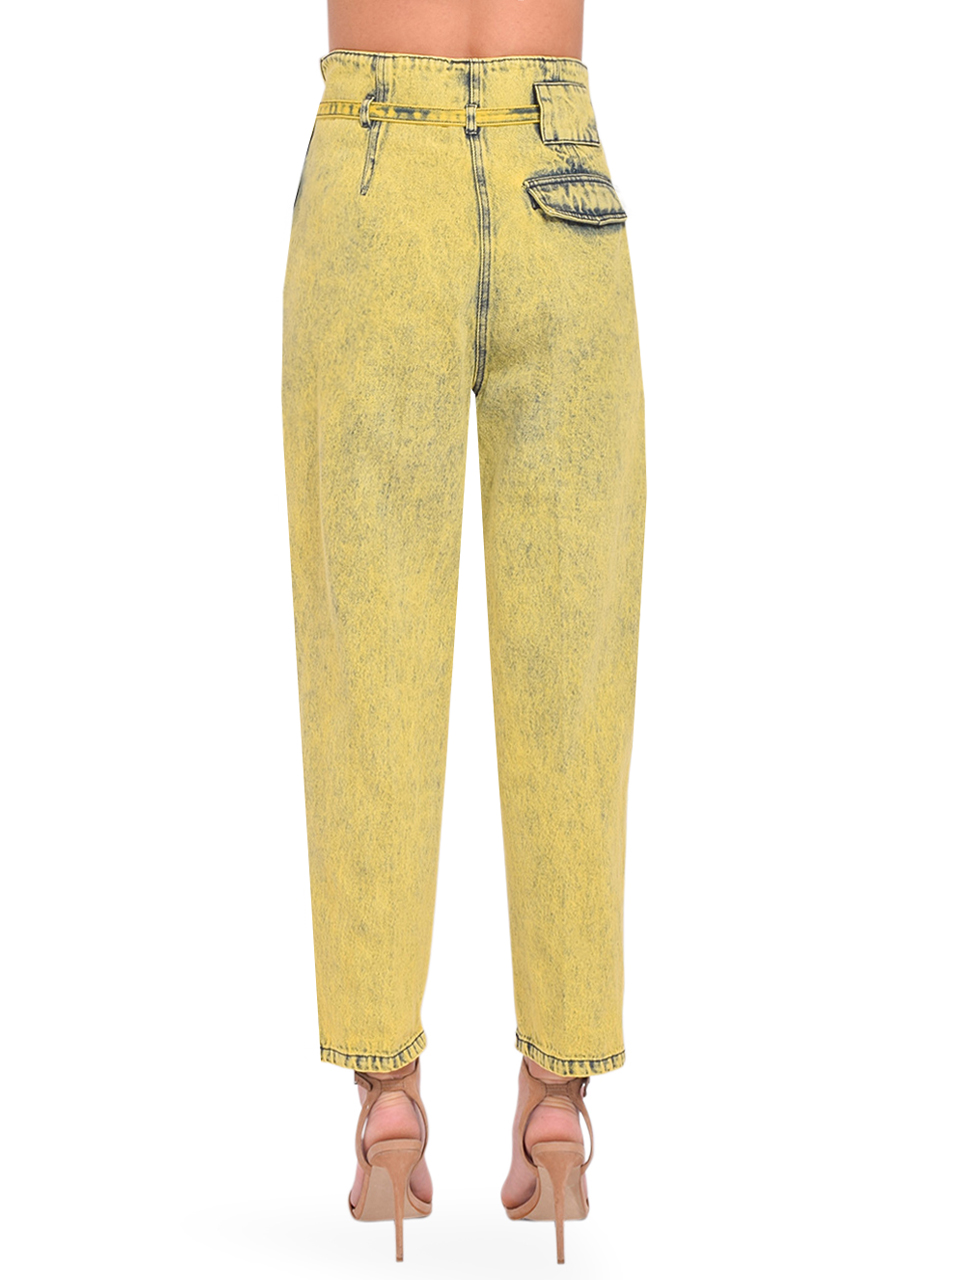 3.1 Phillip Lim Overdyed Denim Origami Pant in Pineapple Back View 